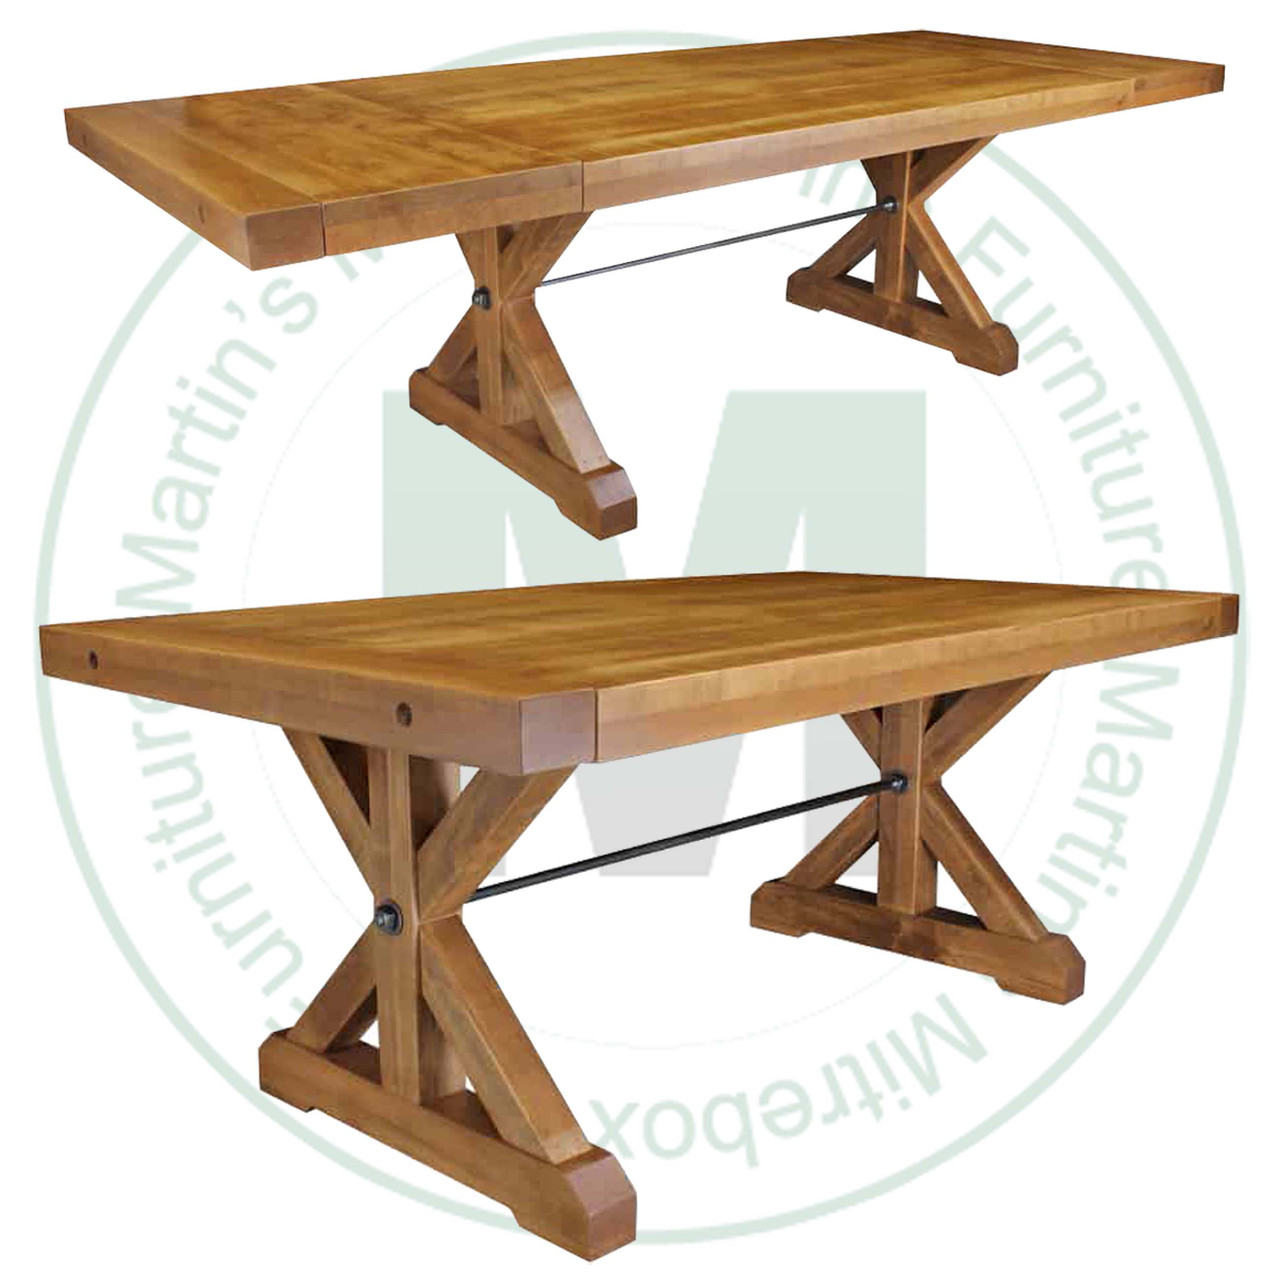 Wormy Maple Klondike Trestle Solid Top Table 36'' Deep x 60'' Wide x 30'' High With 2 - 16'' Leaves